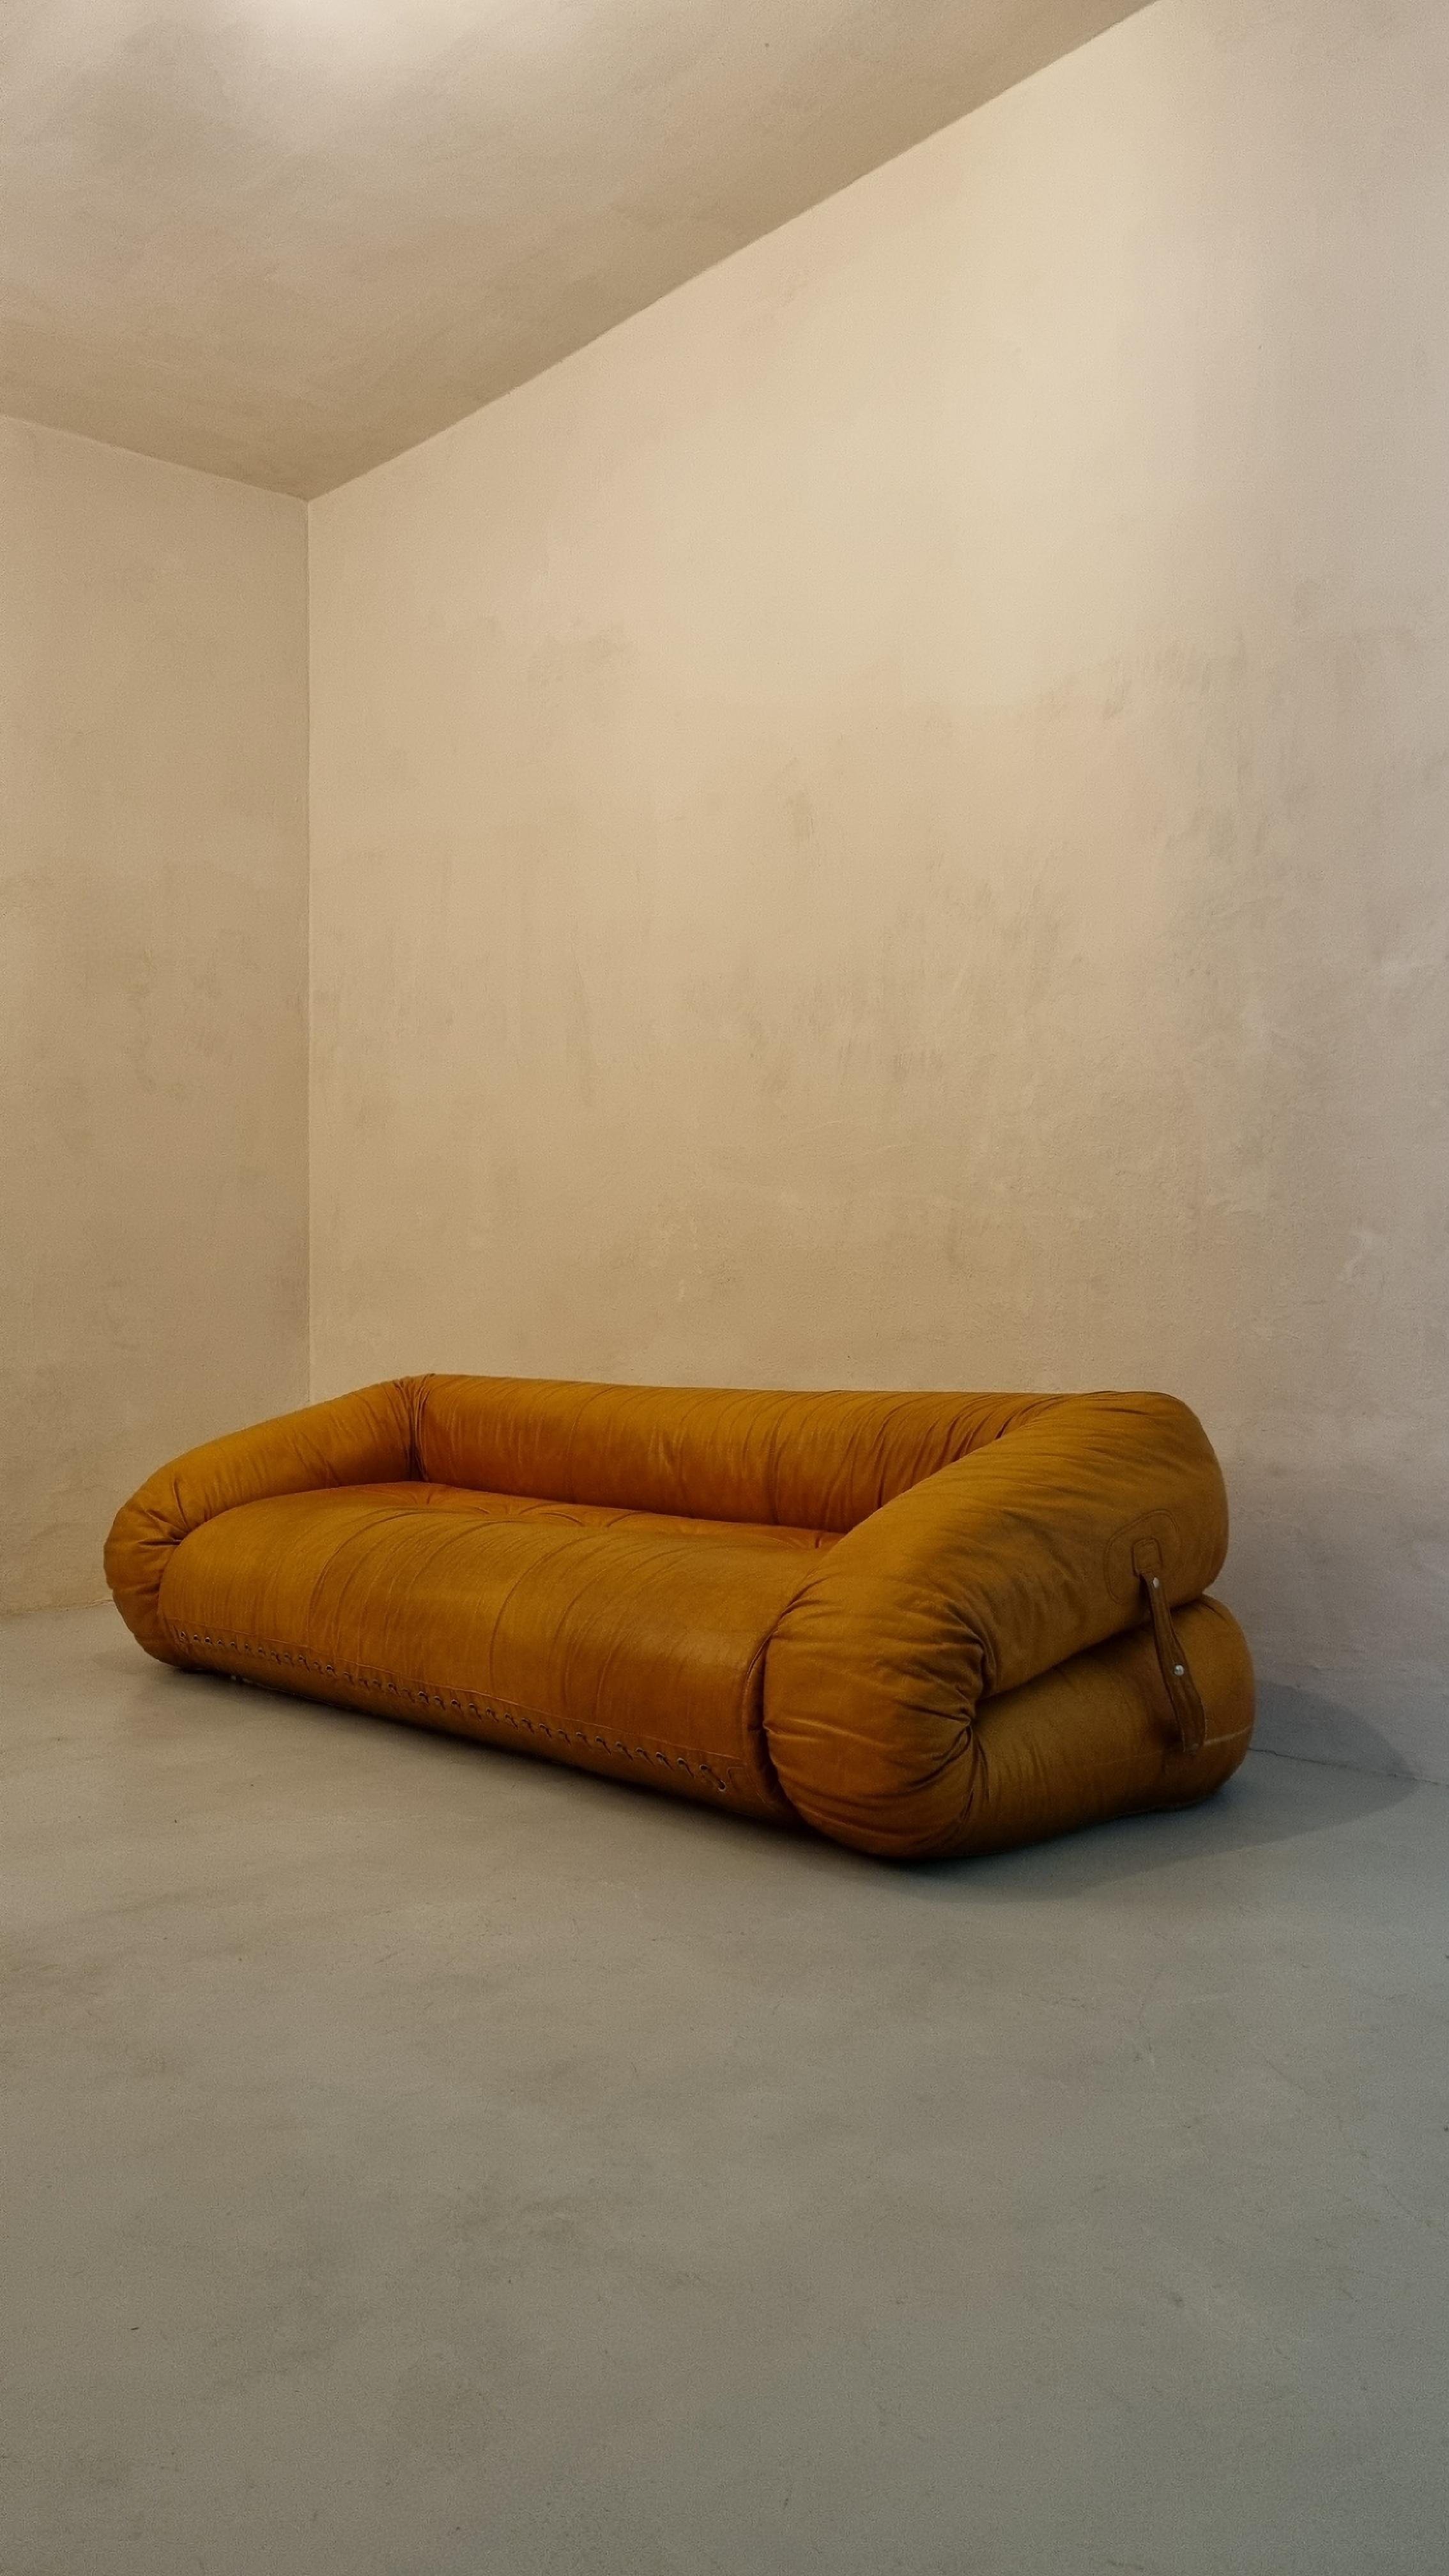 Iconic 3 seater sofa/bed designed by Alessandro Becchi for Giovannetti, 1970.
The sofa is in original leather, very good condition, smaal sign of aging, small hole( about2 mm) in the seat.
The sofa can be opened and turned into comfortable